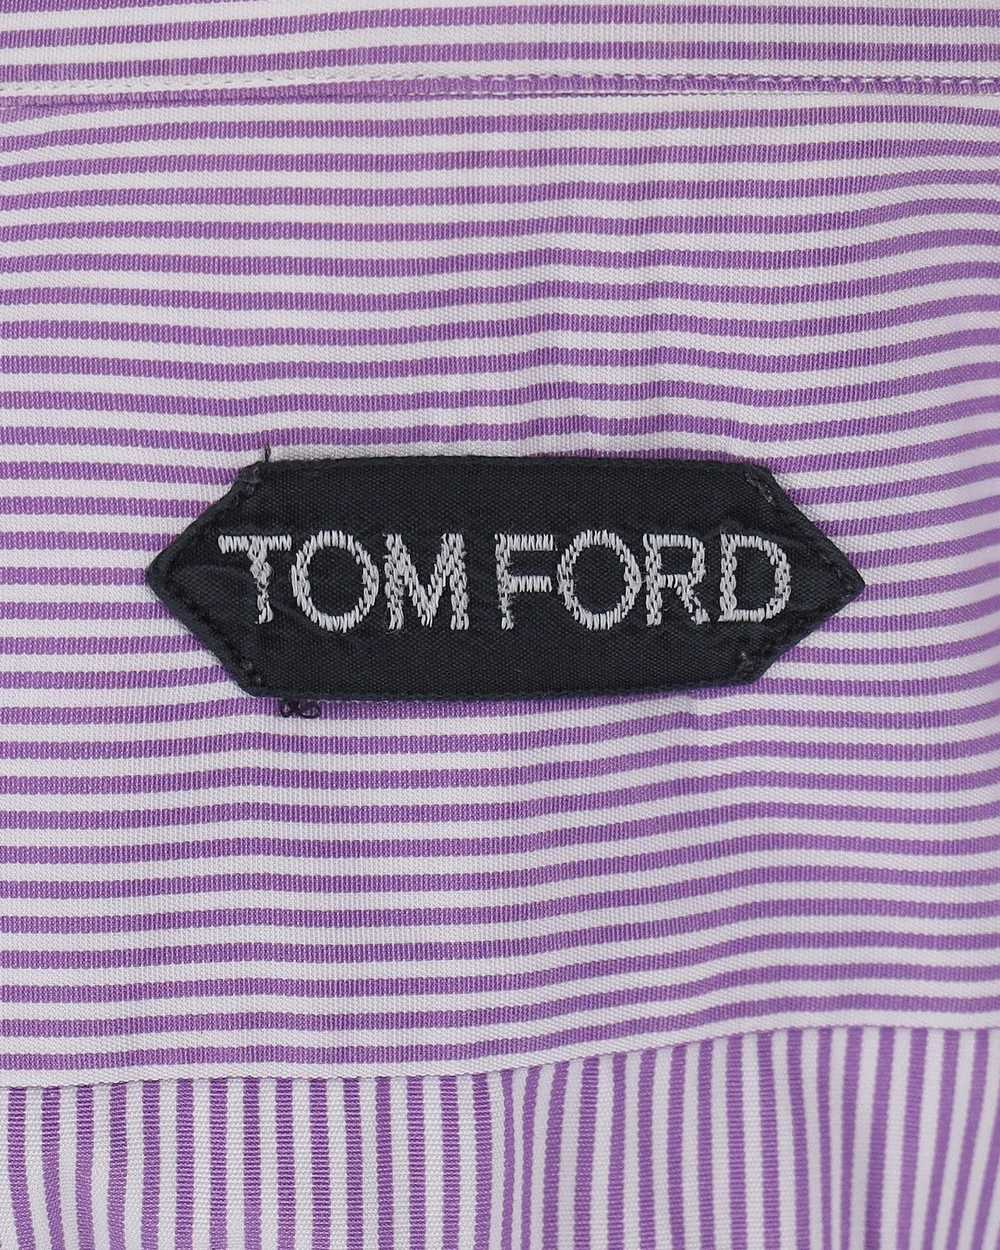 Tom Ford Striped Cotton Shirt in Bold Purple - image 4